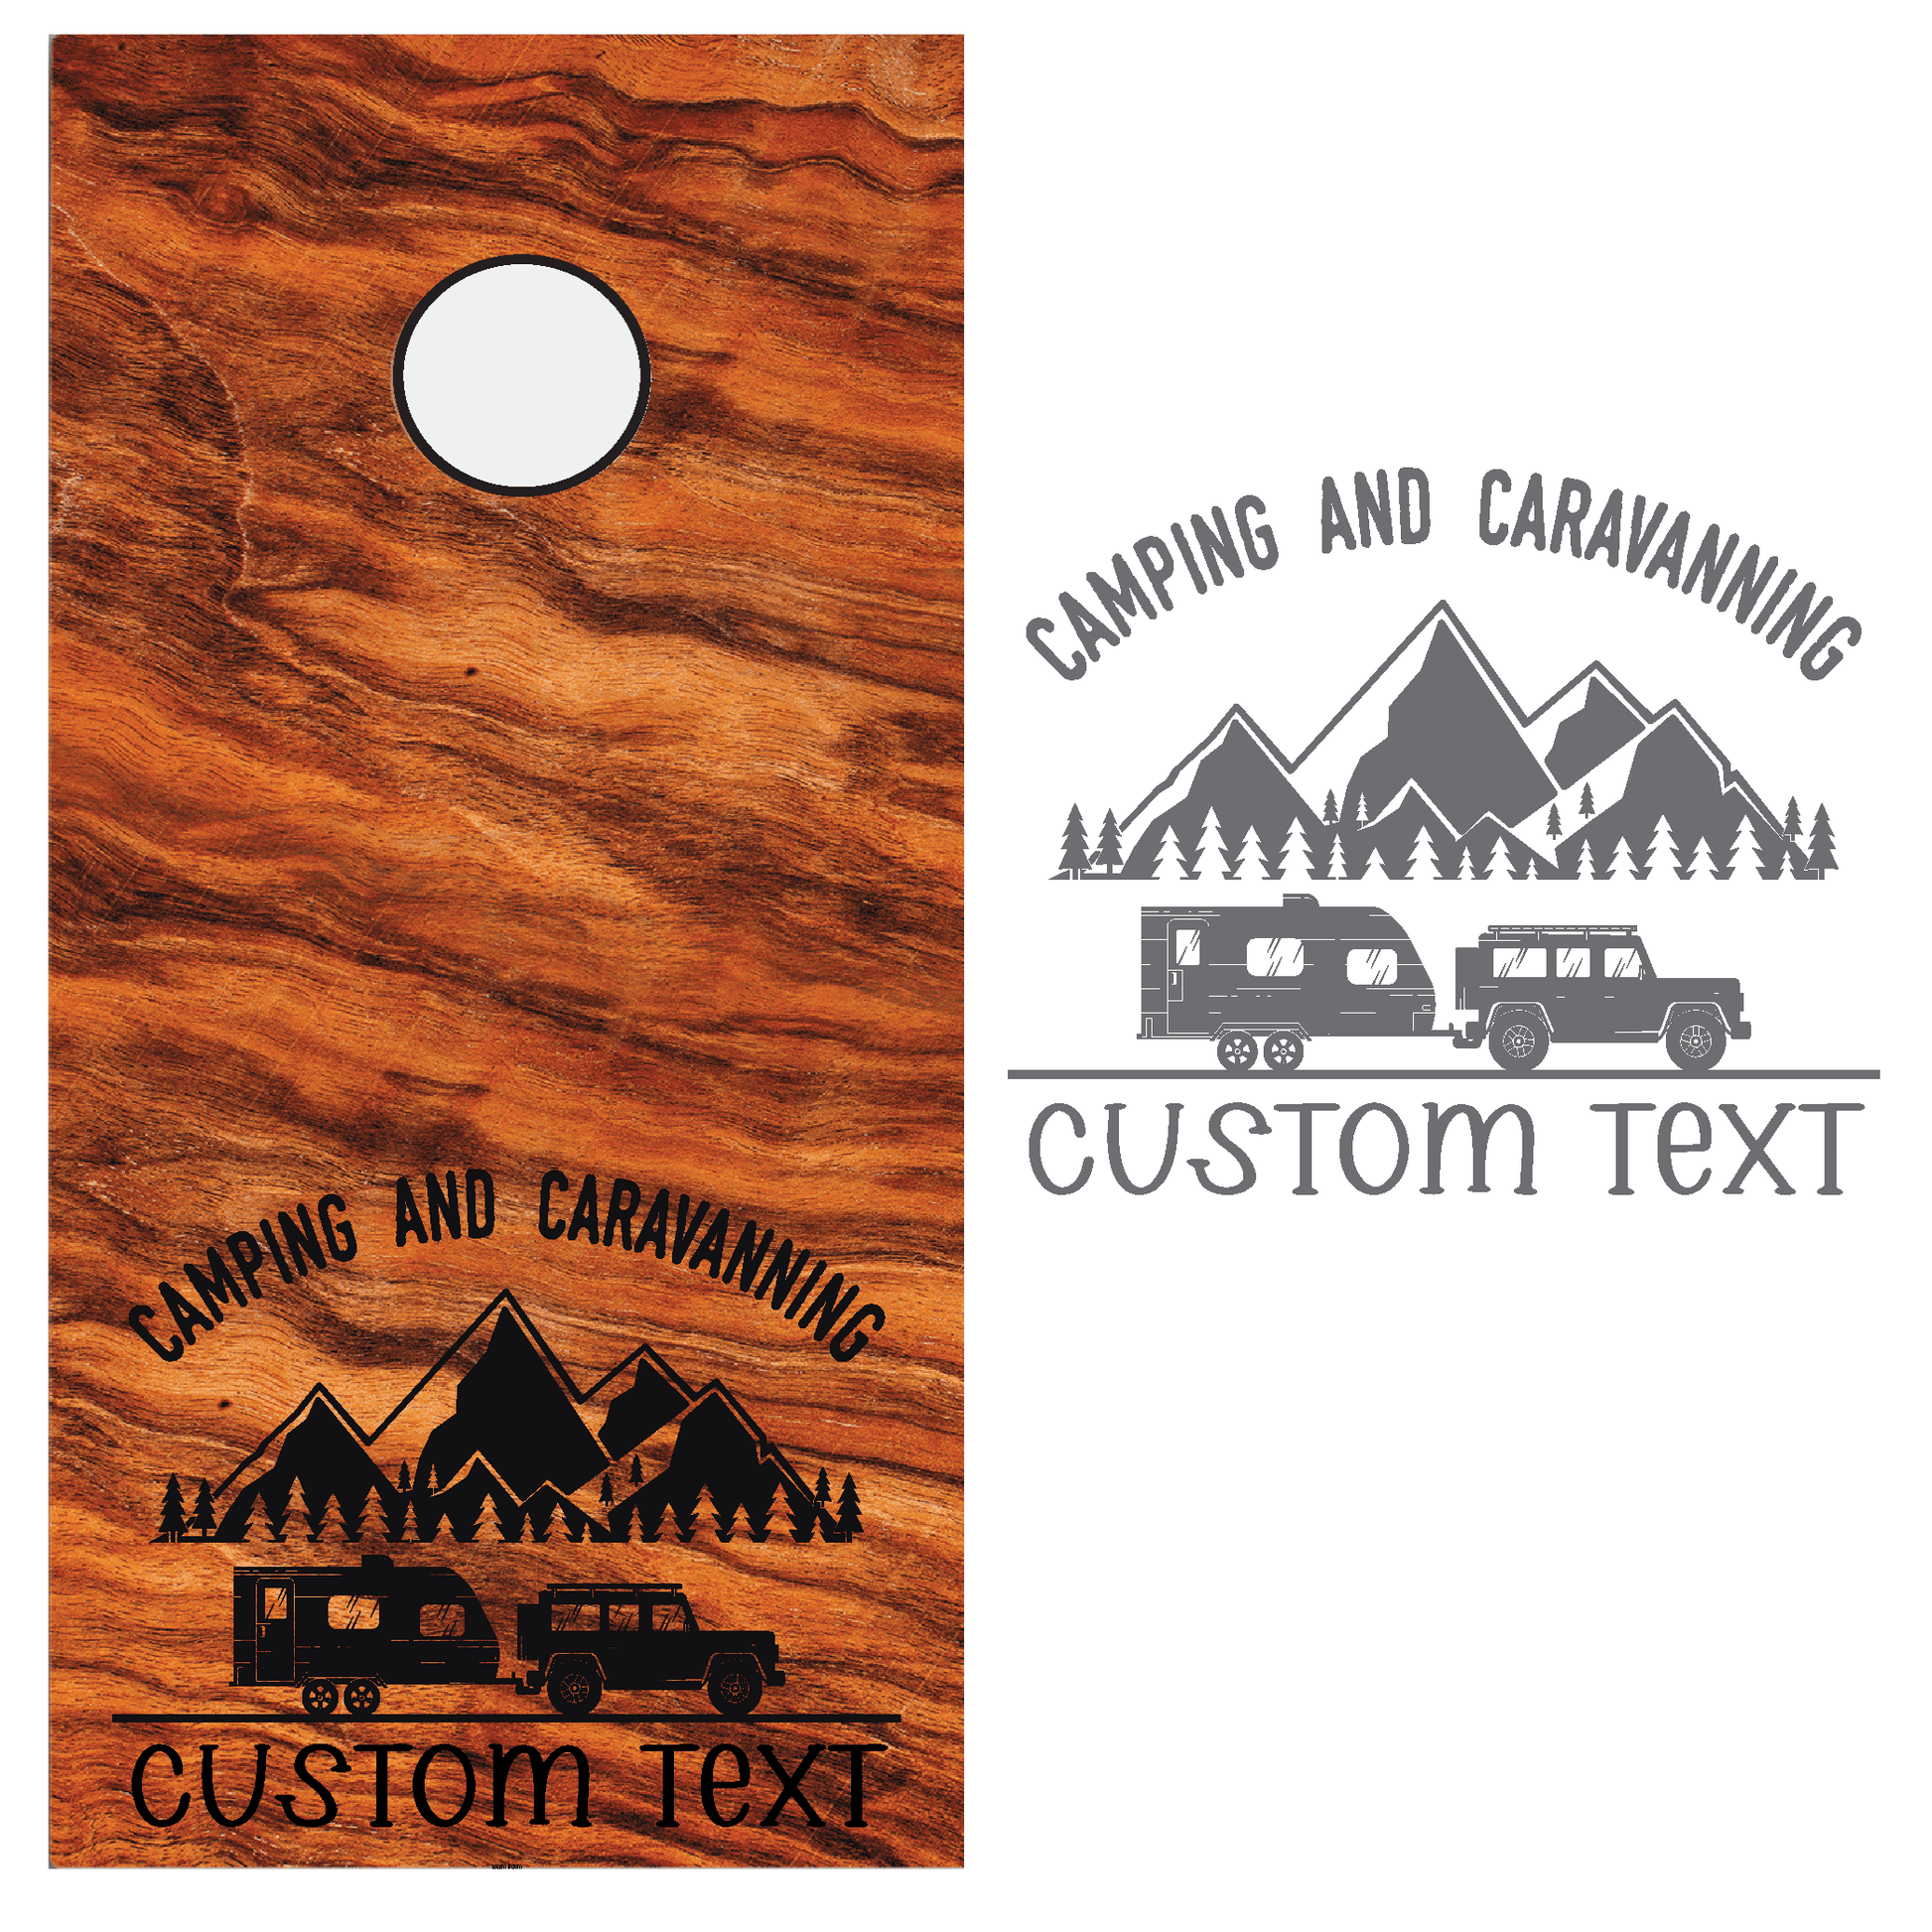 ShopVinylDesignStore.com Camping and Caravanning with CUSTOM TEXT for Corn Hole Boards Wide Style 31 Shop Vinyl Design decals stickers